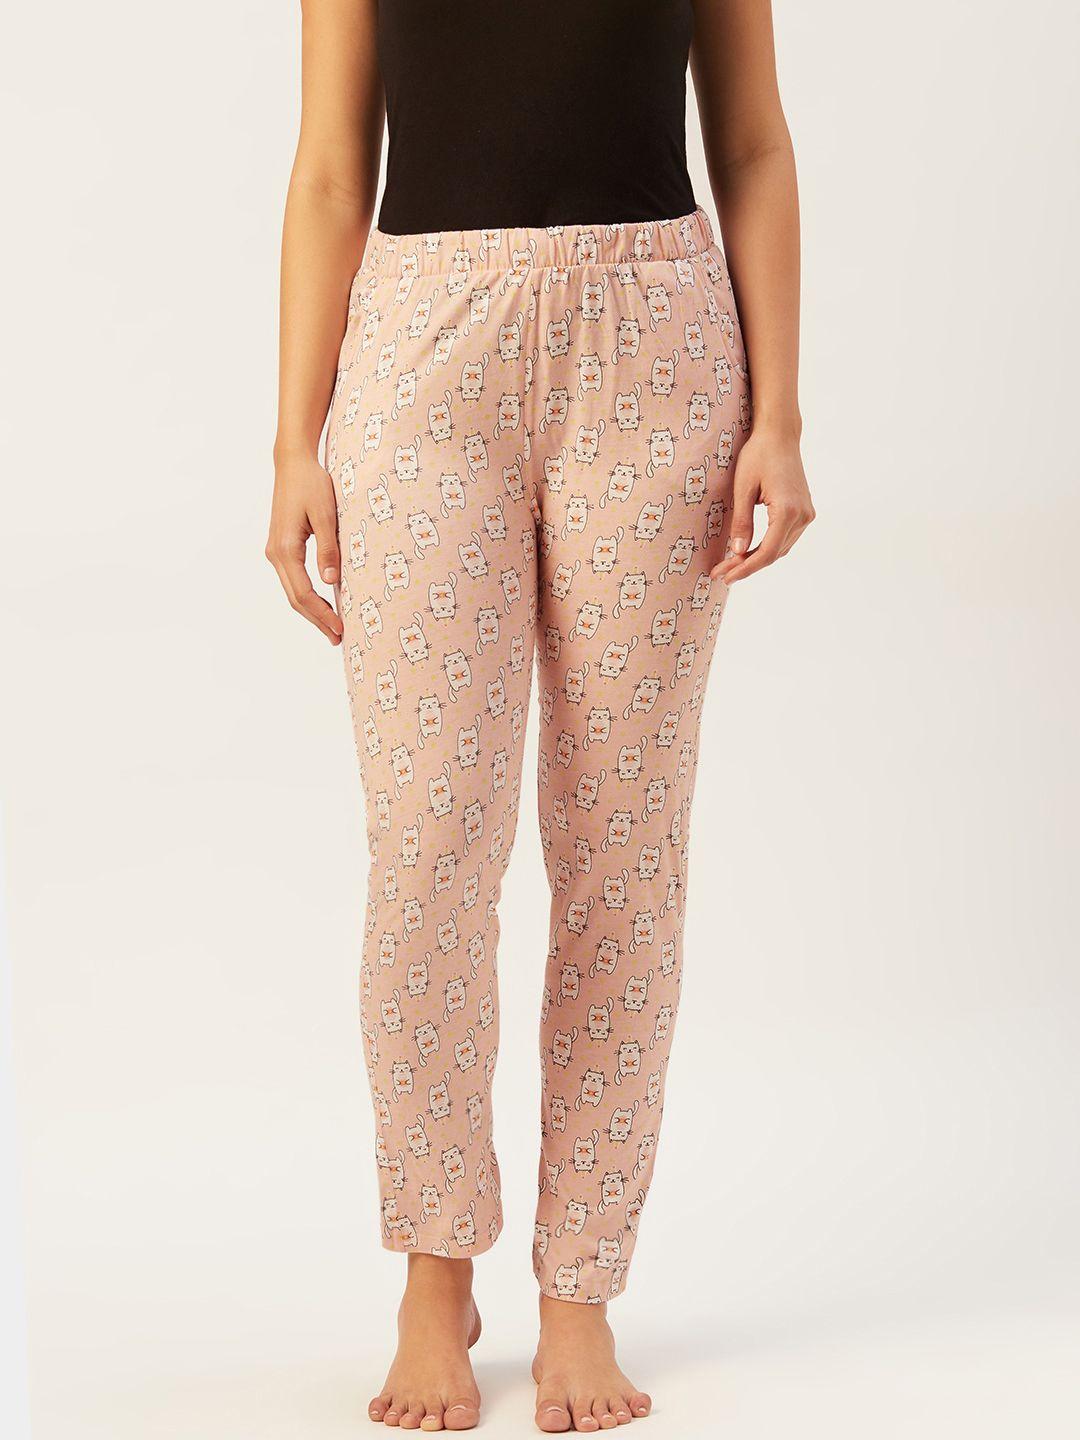 sweet-dreams-women-peach-coloured-&-white-printed-knitted-pure-cotton-lounge-pants